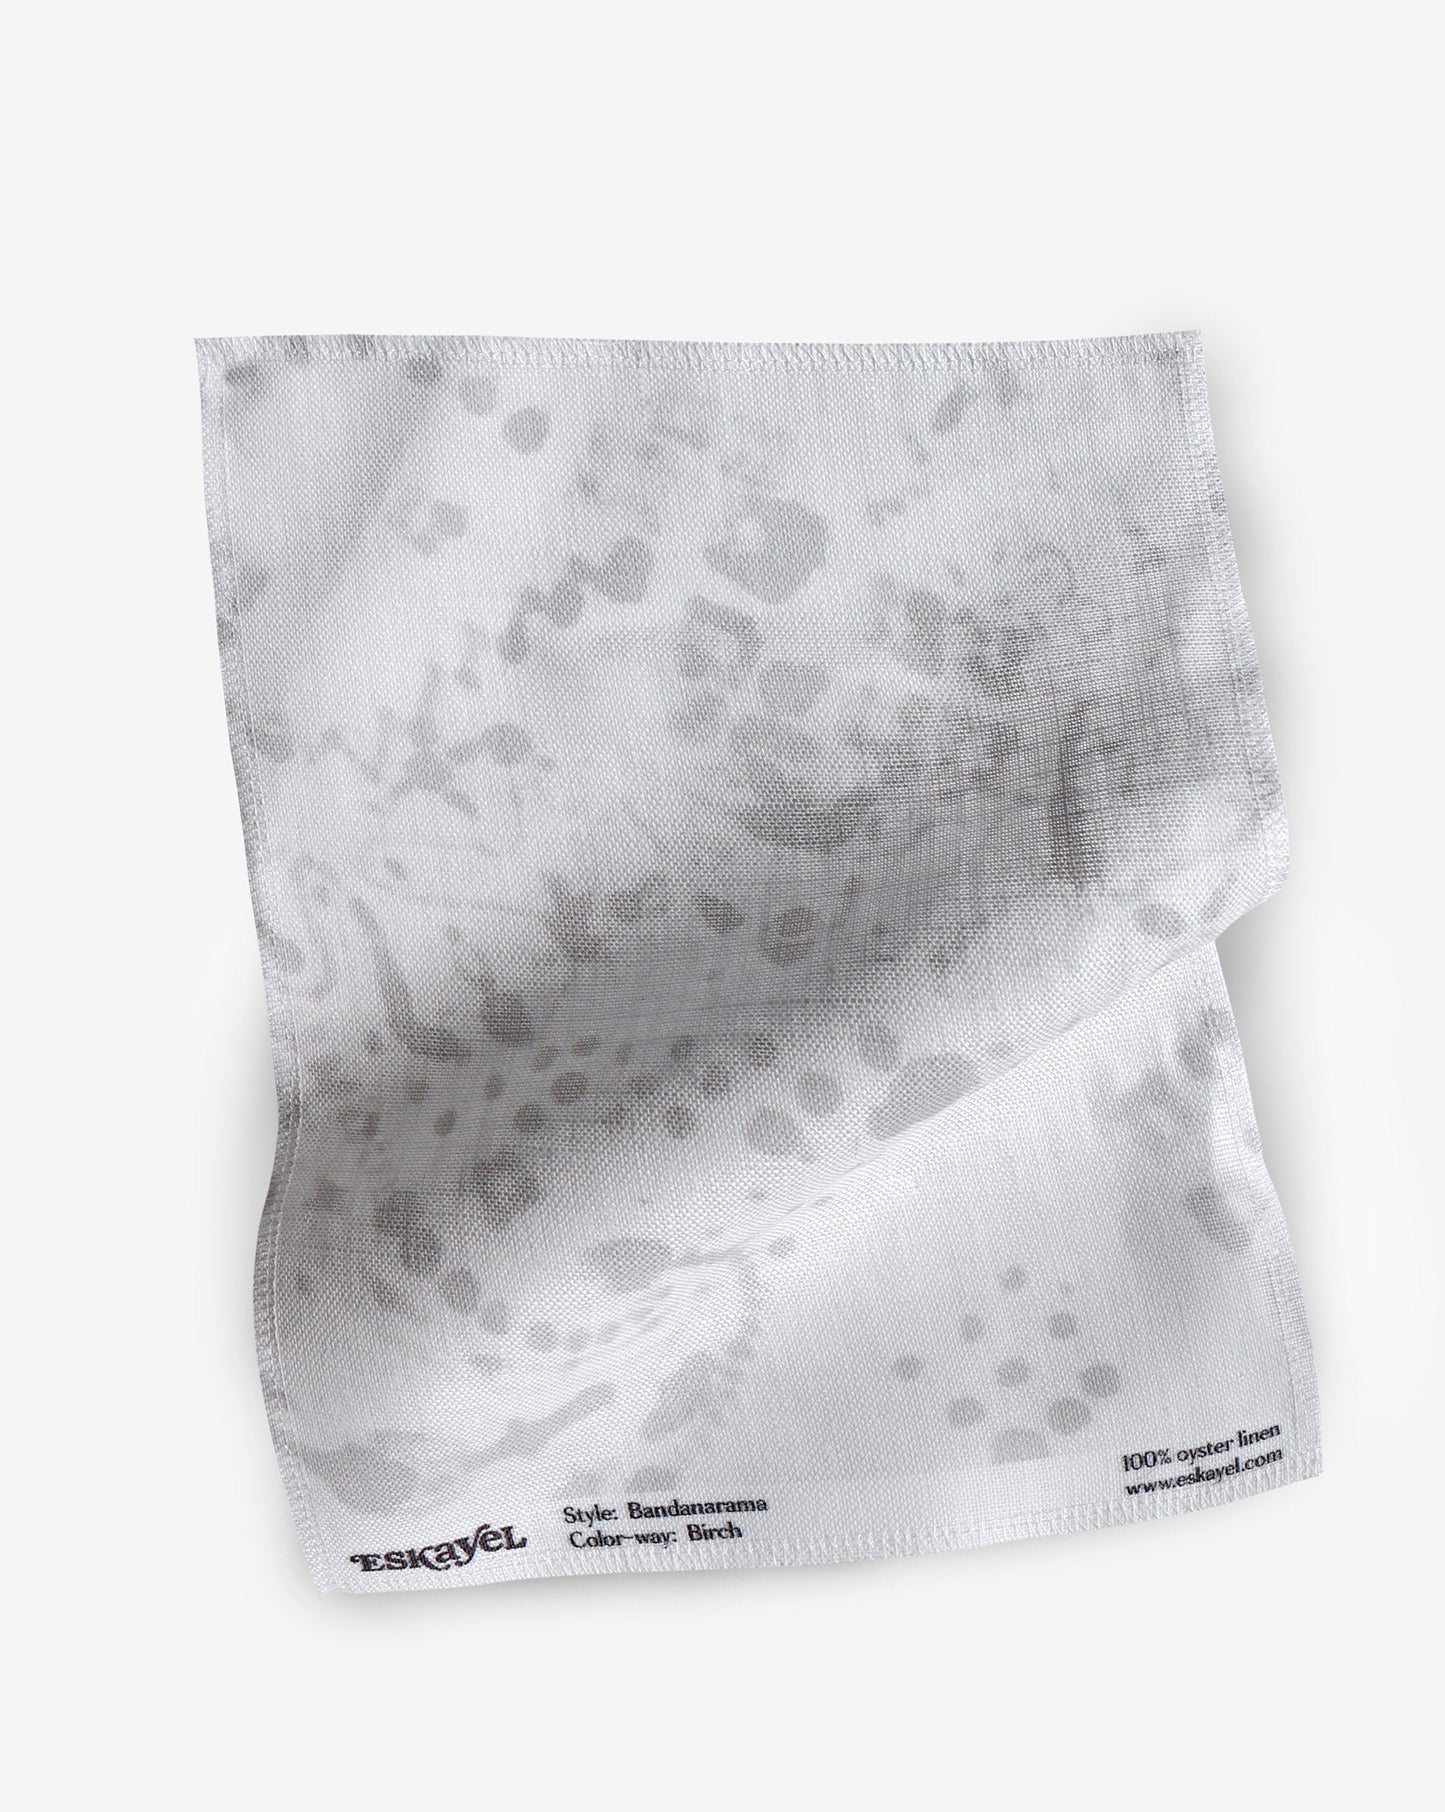 A fabric with our bandanarama pattern featuring a traditional bandana design in light grey and white.